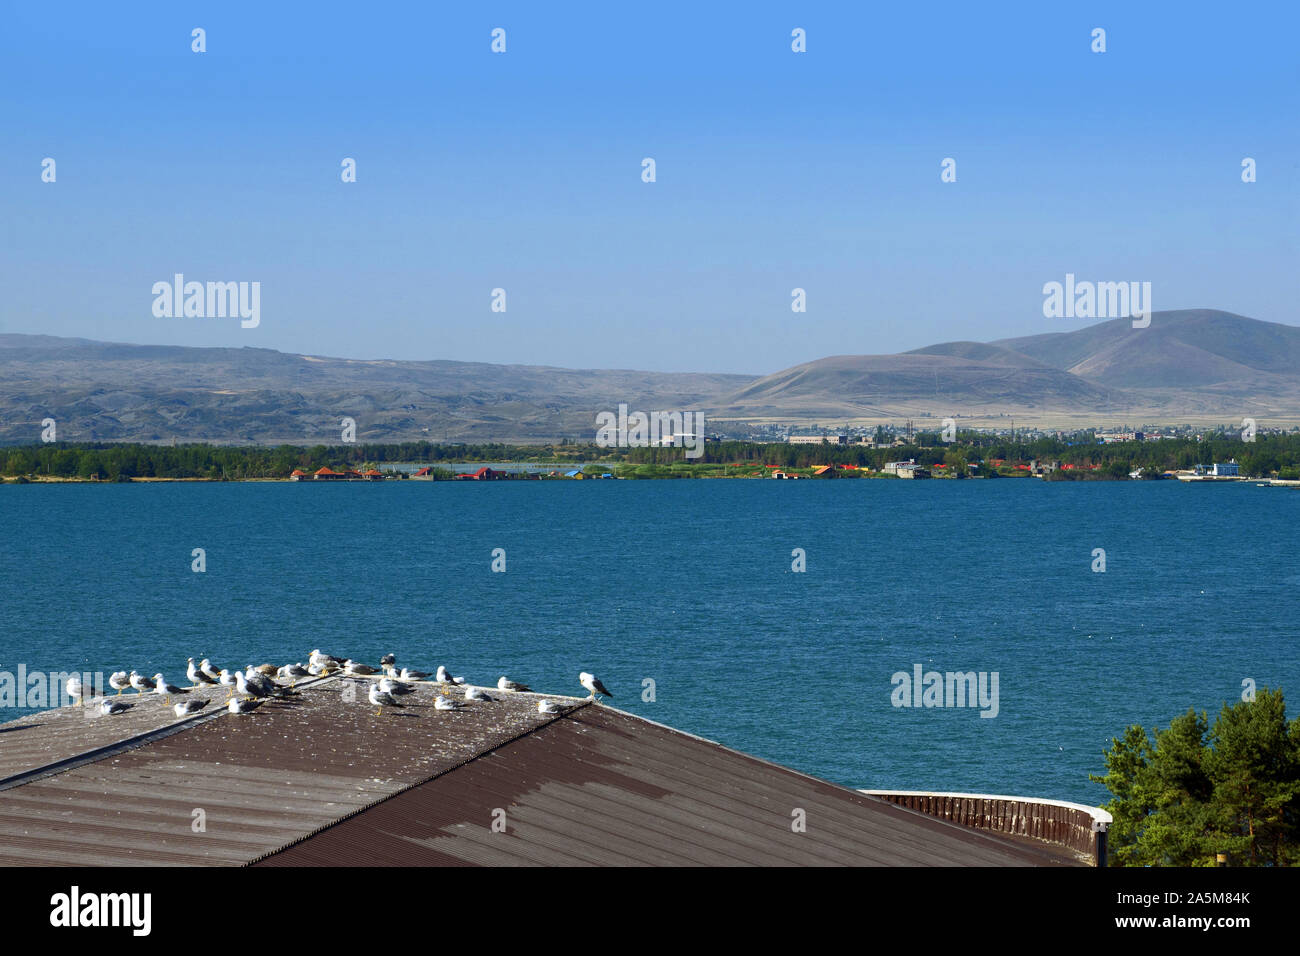 Armenia: lake sevan with gulls on a roof Stock Photo